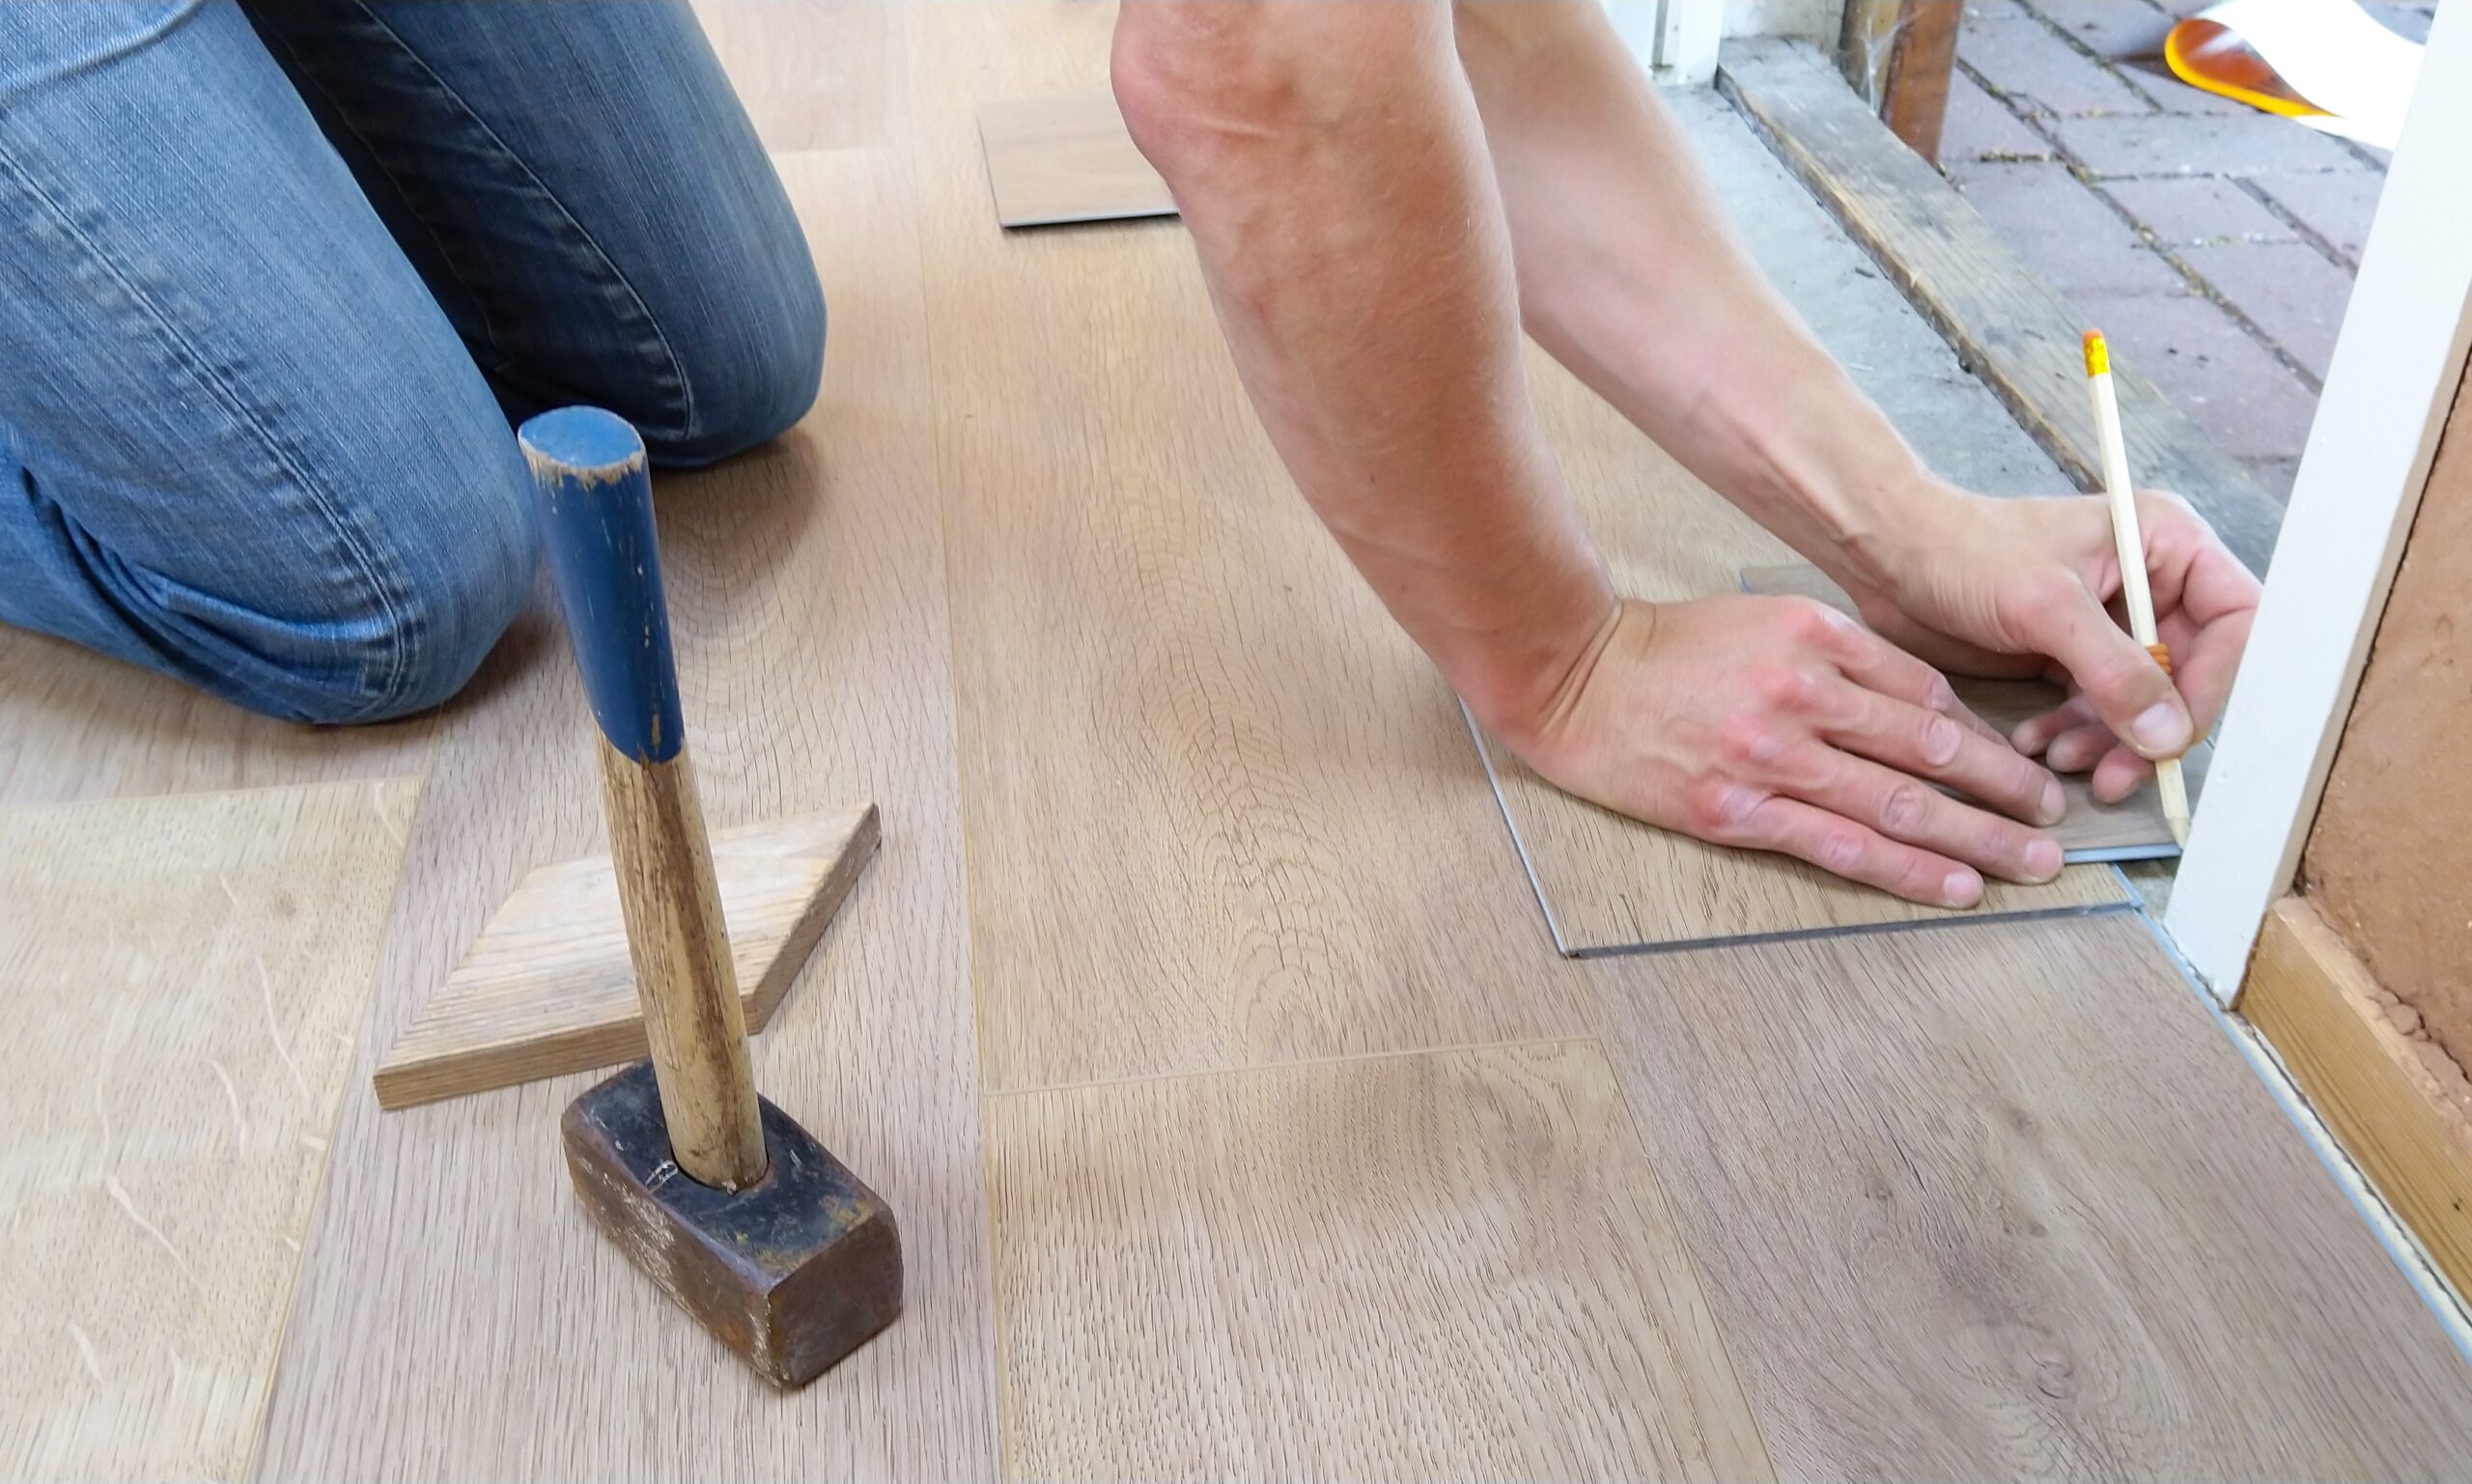 A person's hands working on a wooden floor.